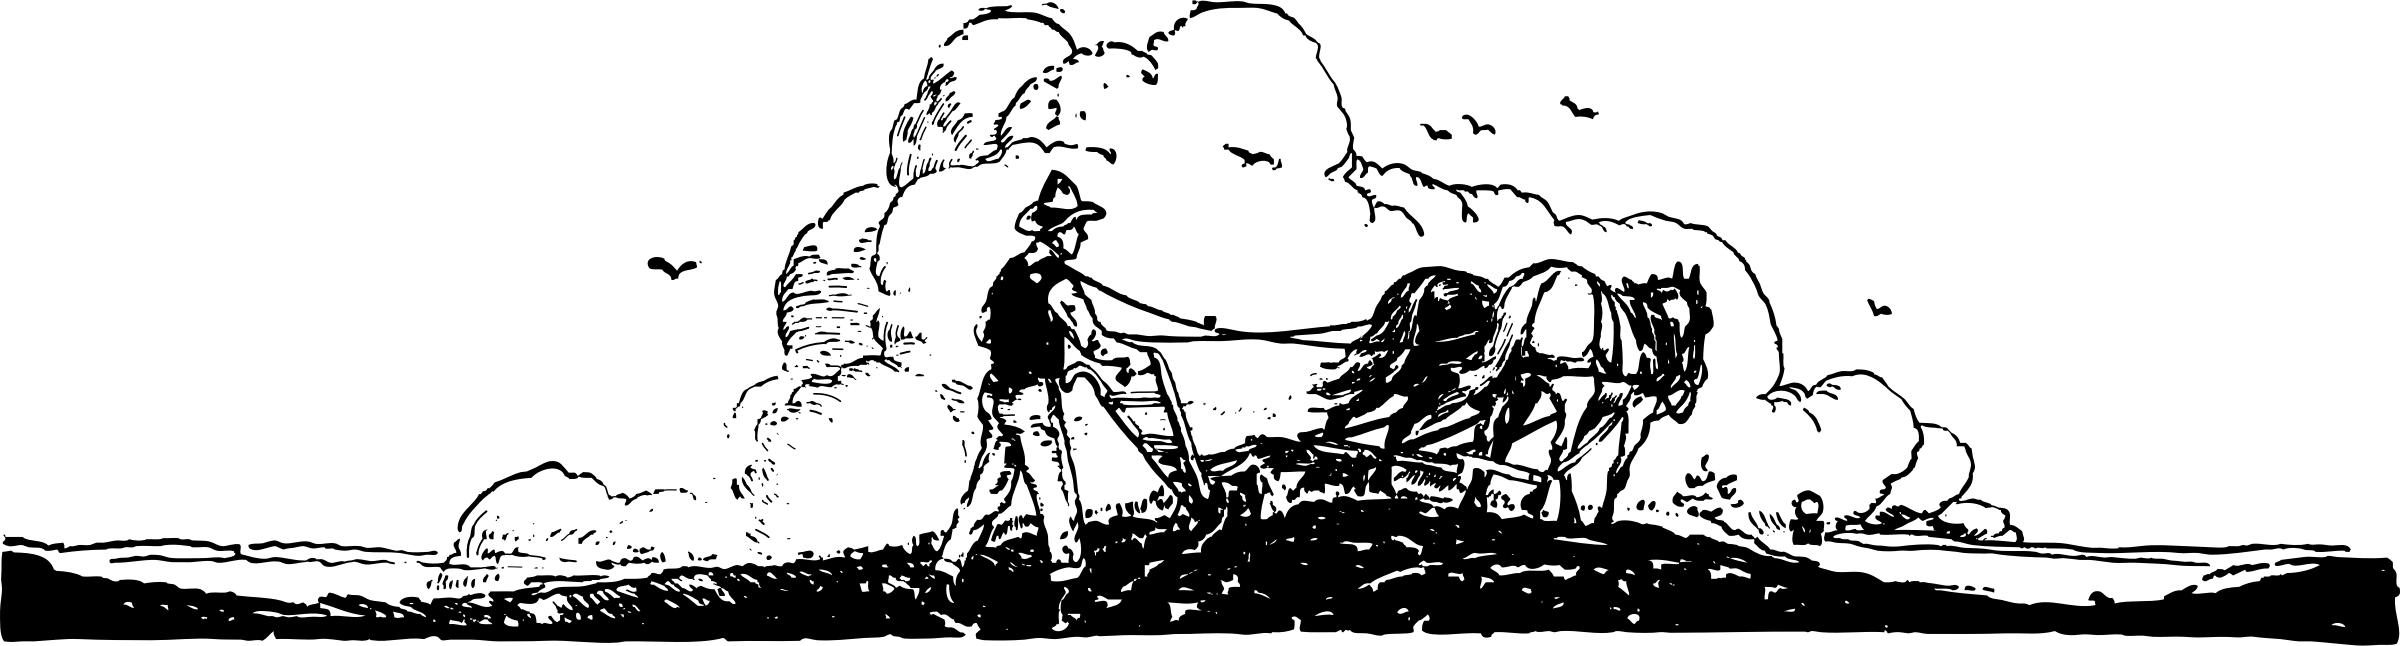 plowing the land png